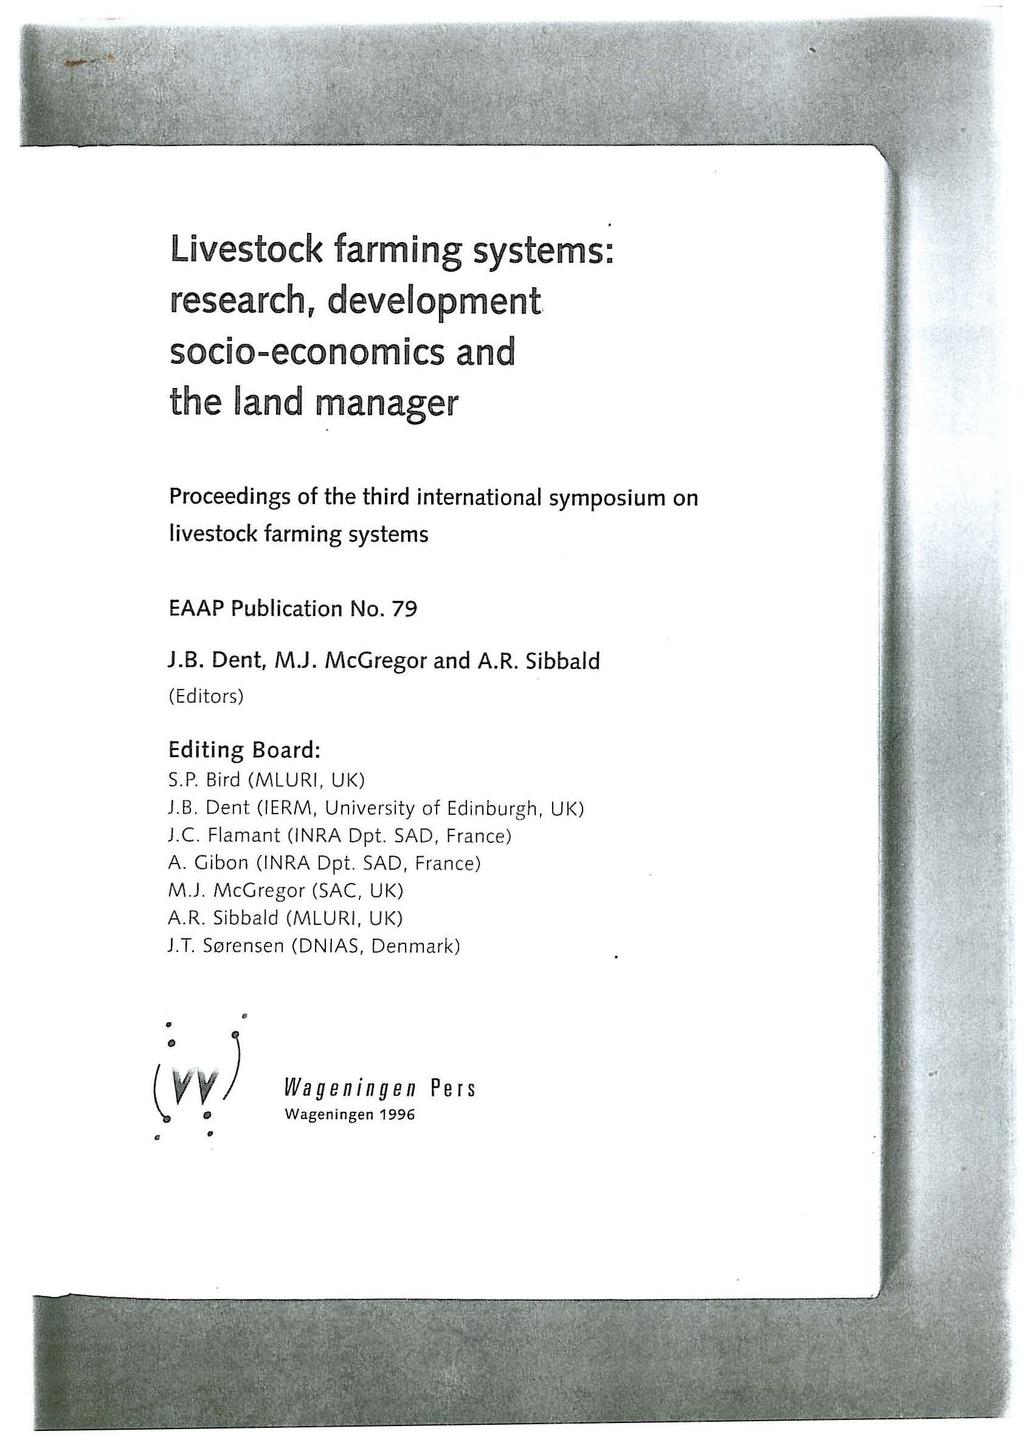 Livestock farming systems: research, development socio-economics and the land manager Proceedings of the third international symposium on livestock farming systems EAAP Publication No. 79 J.B.